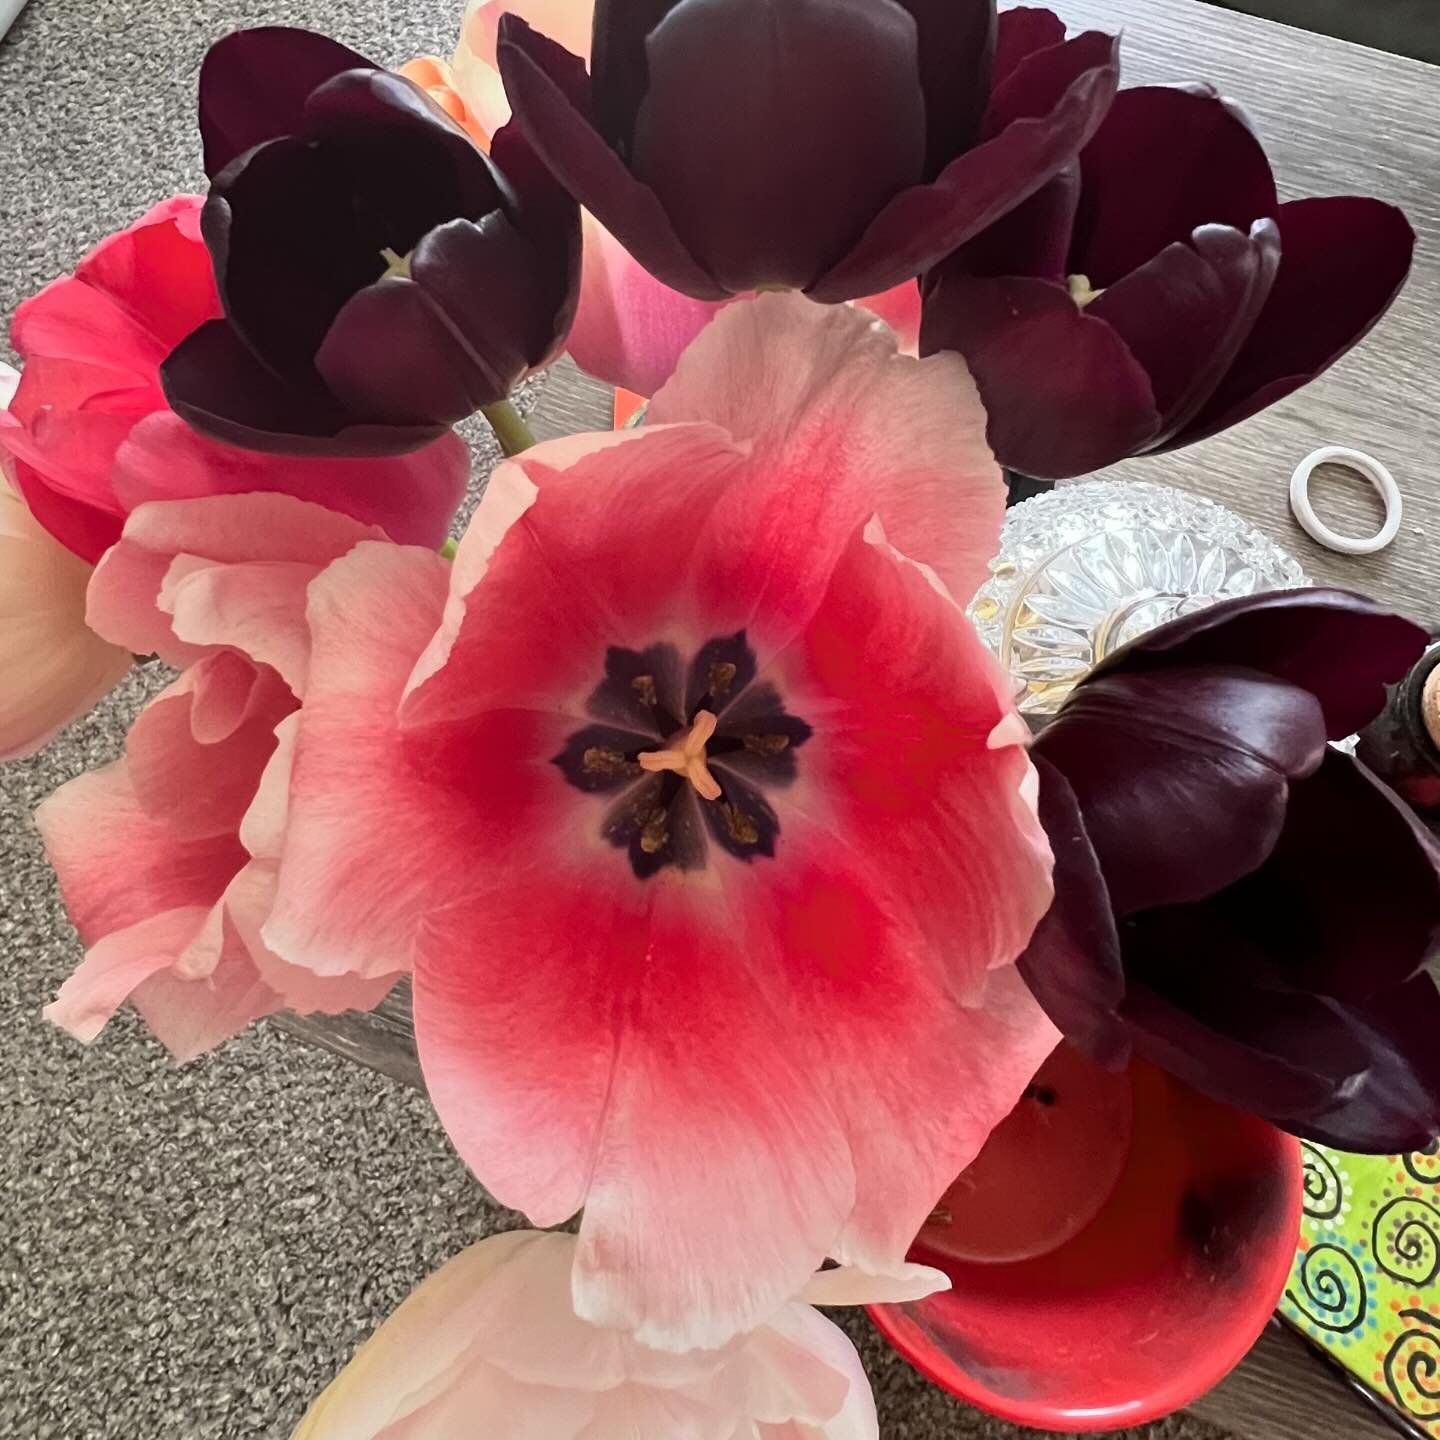 Jeff stopped the other day and got me a bouquet of tulips from a local farm and I&rsquo;m obsessed with the blooms 😍😍 

It&rsquo;s really nice to get flowers for no reason at all, when you least expect it 🥰🥰. He worked 7 days last week, a 10 or 1